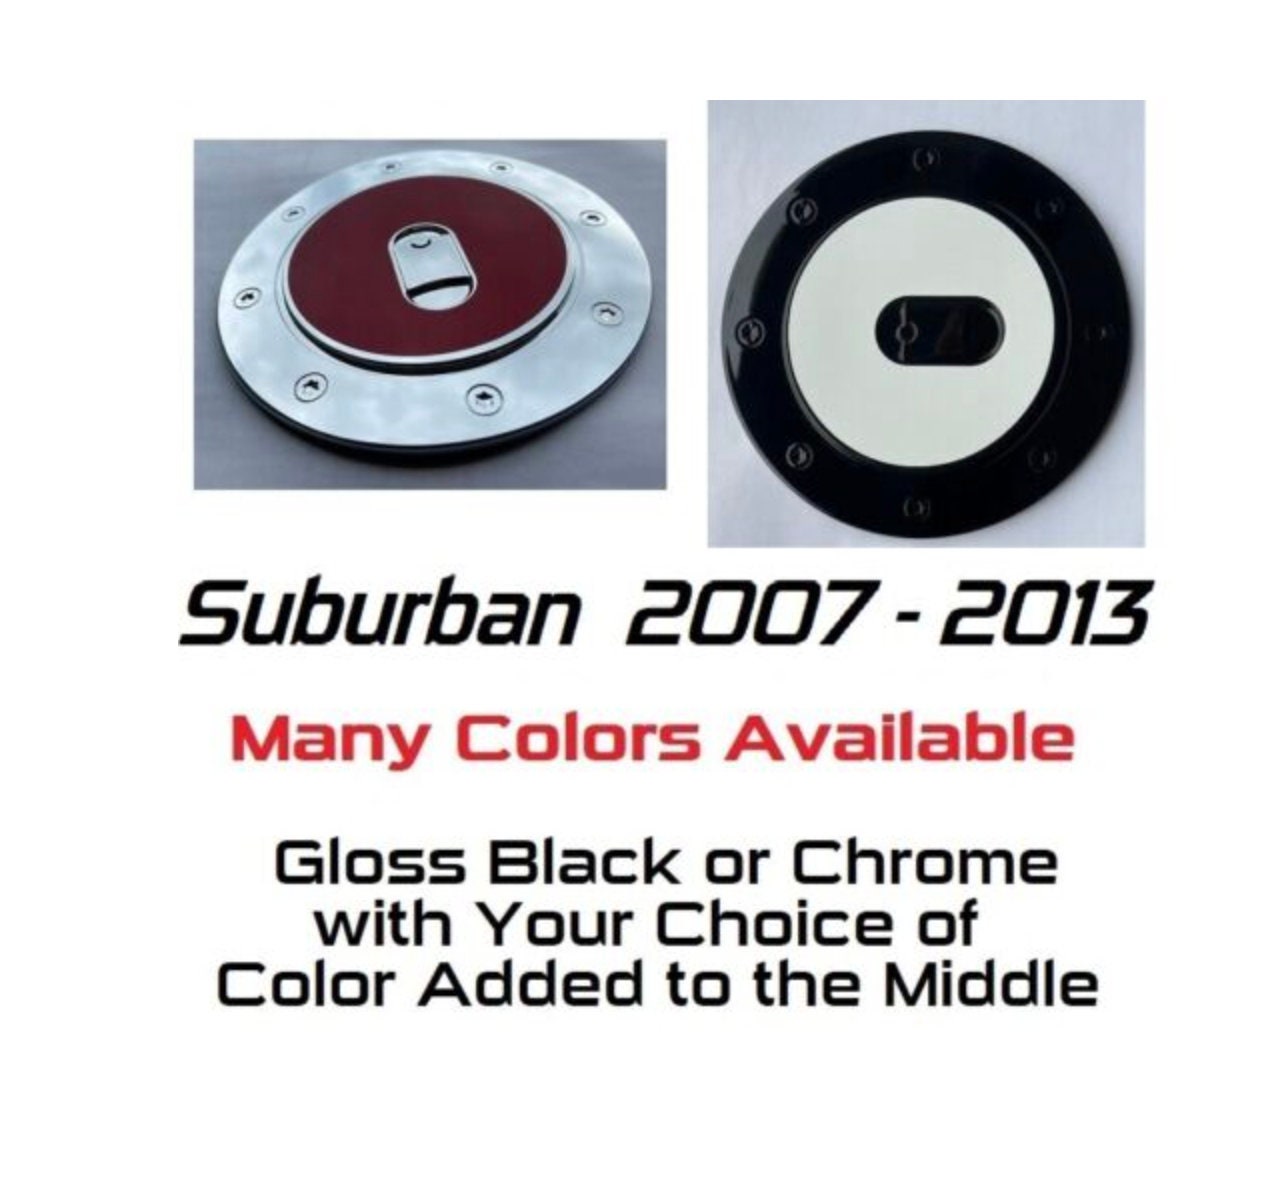 Custom Black OR Chrome Gas Door Cover For the 2007 - 2013 Chevy Suburban -- You Choose the Middle Color Insert